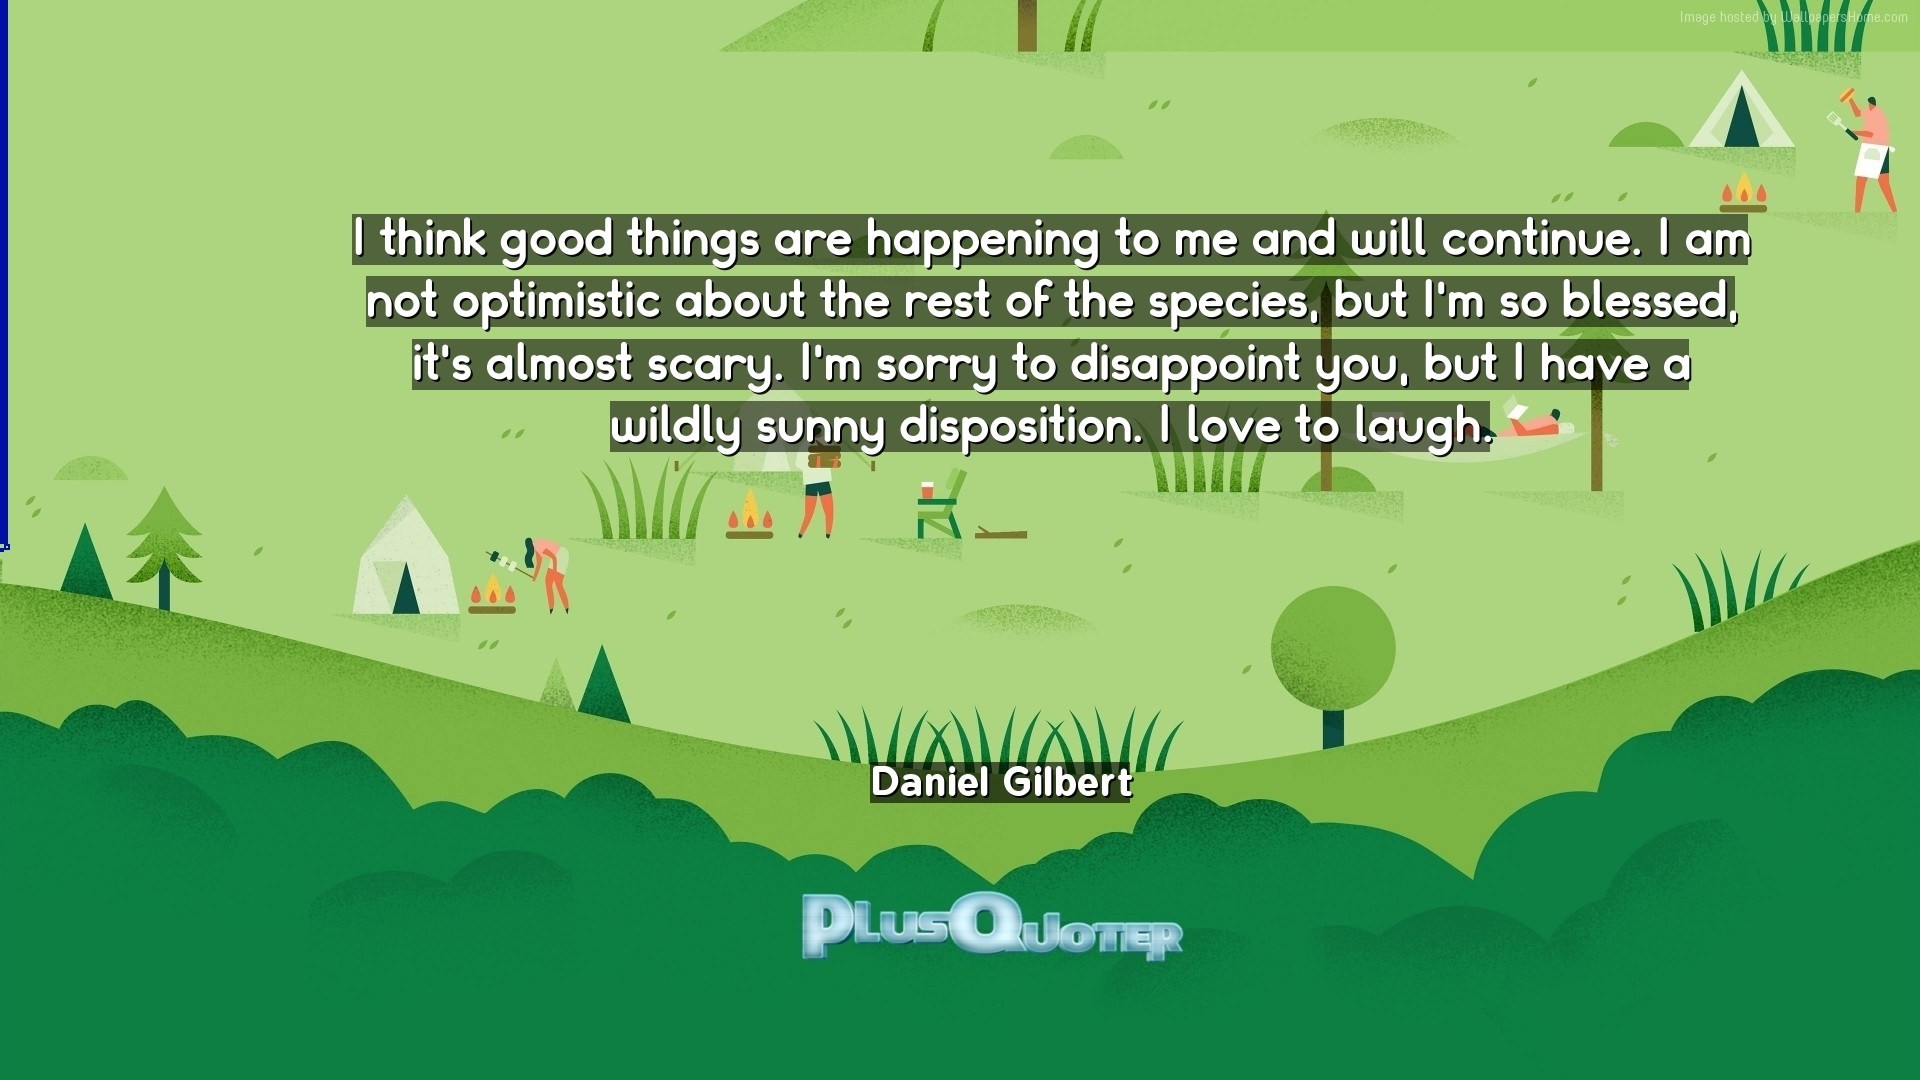 1920x1080 Download Wallpaper with inspirational Quotes- "I think good things are  happening to me and